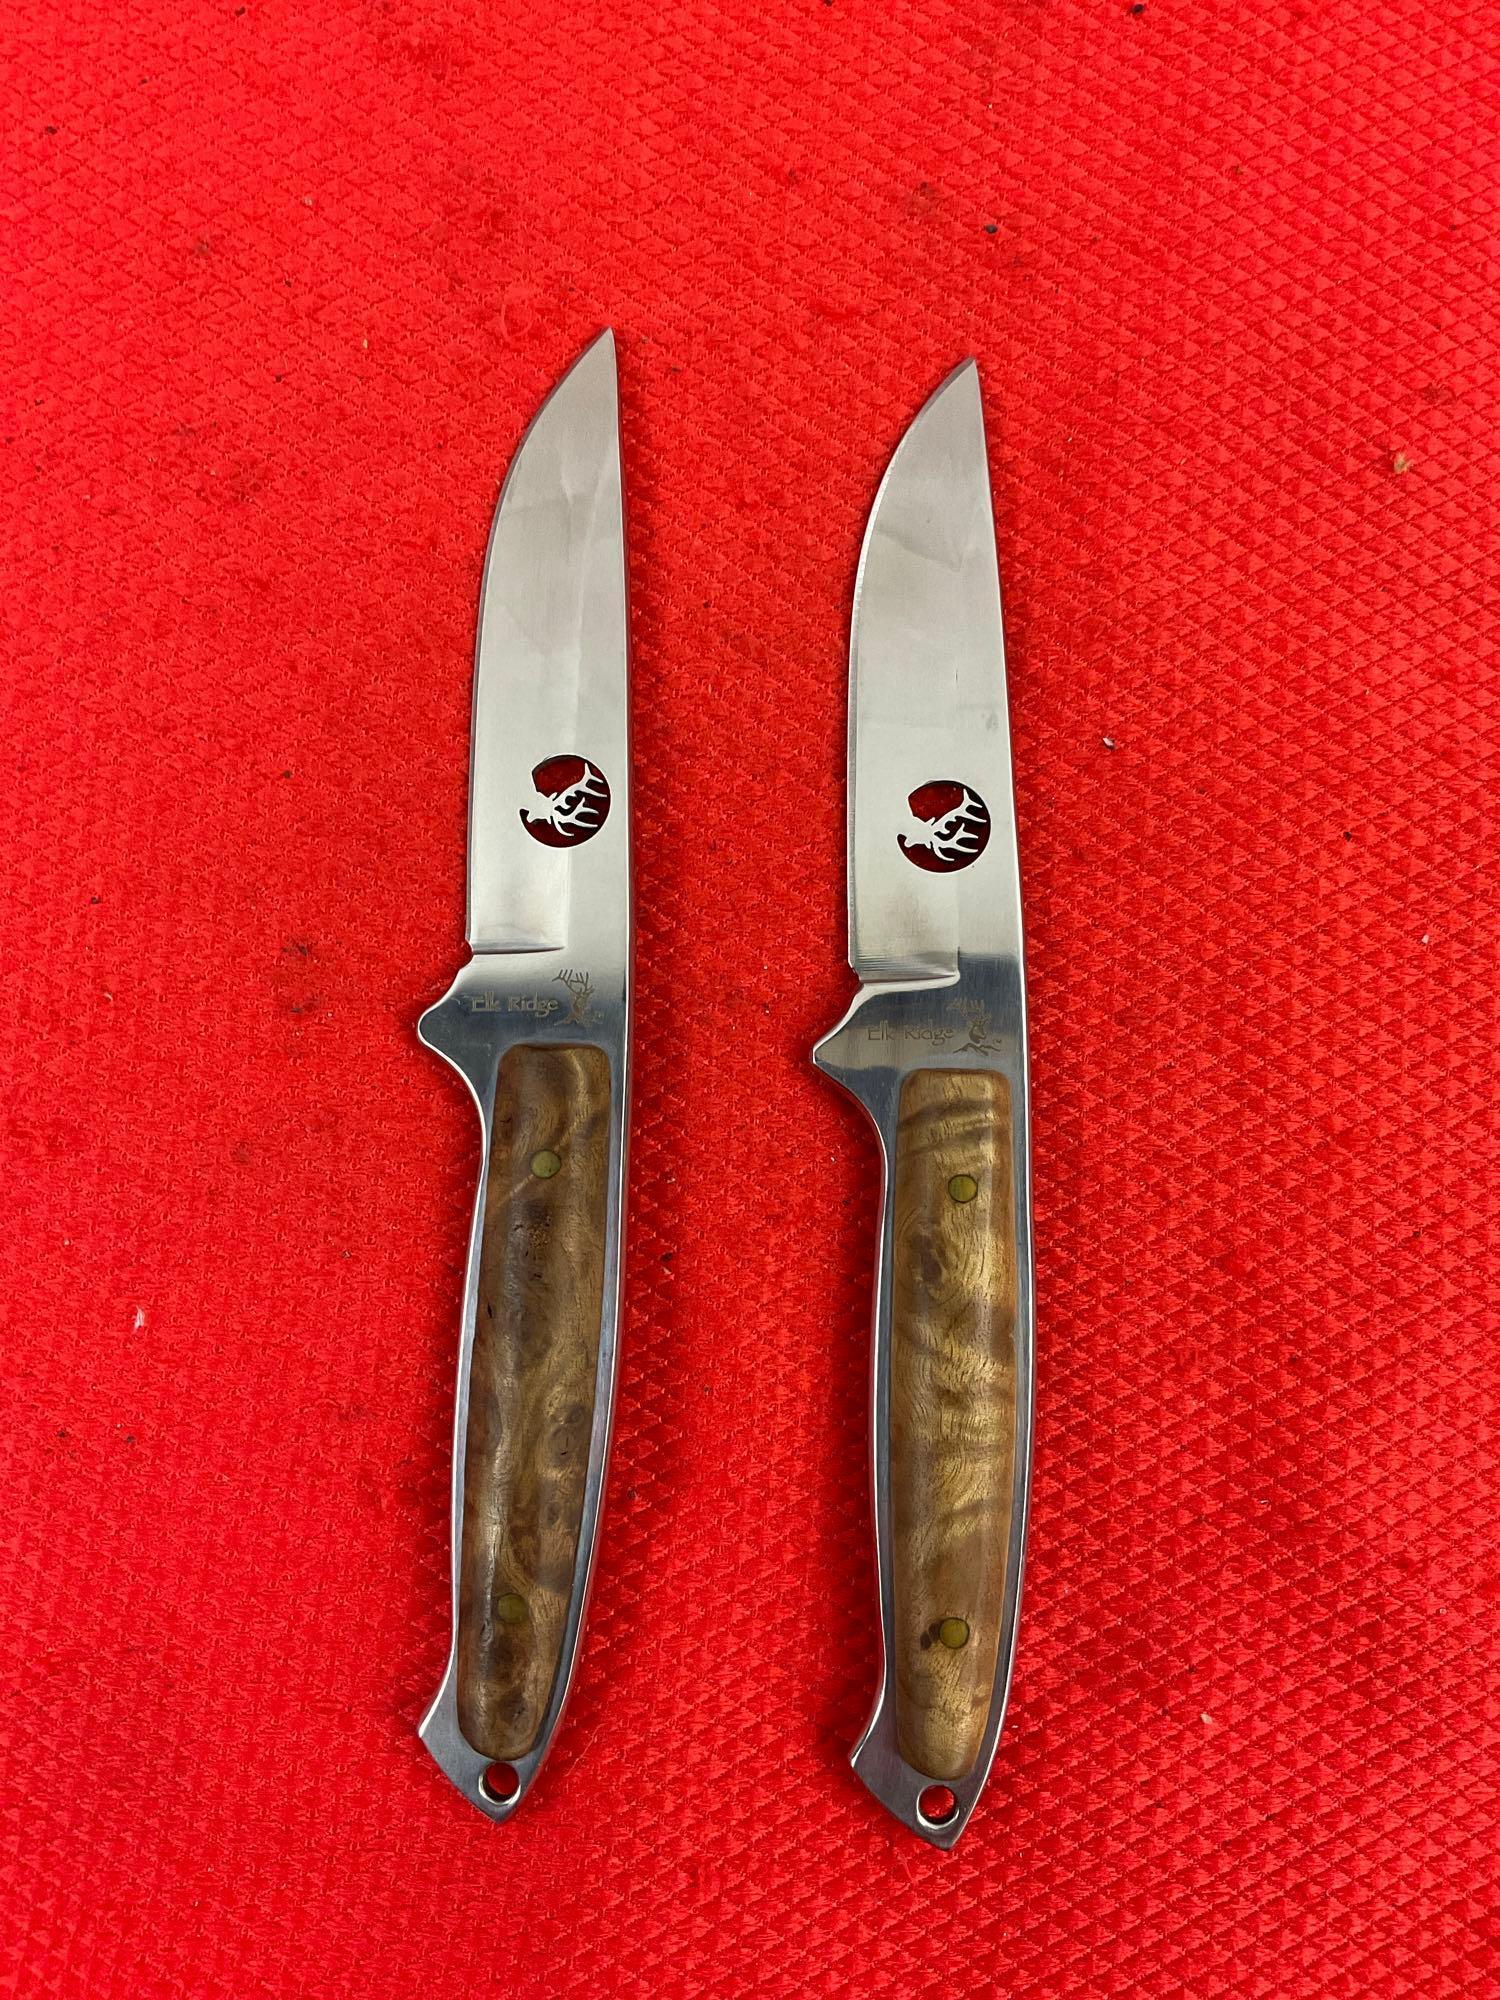 Pair of Elk Ridge 440 Stainless Steel 3" Fixed Blade Hunting Knives w/ Sheathes Model ER-048. See